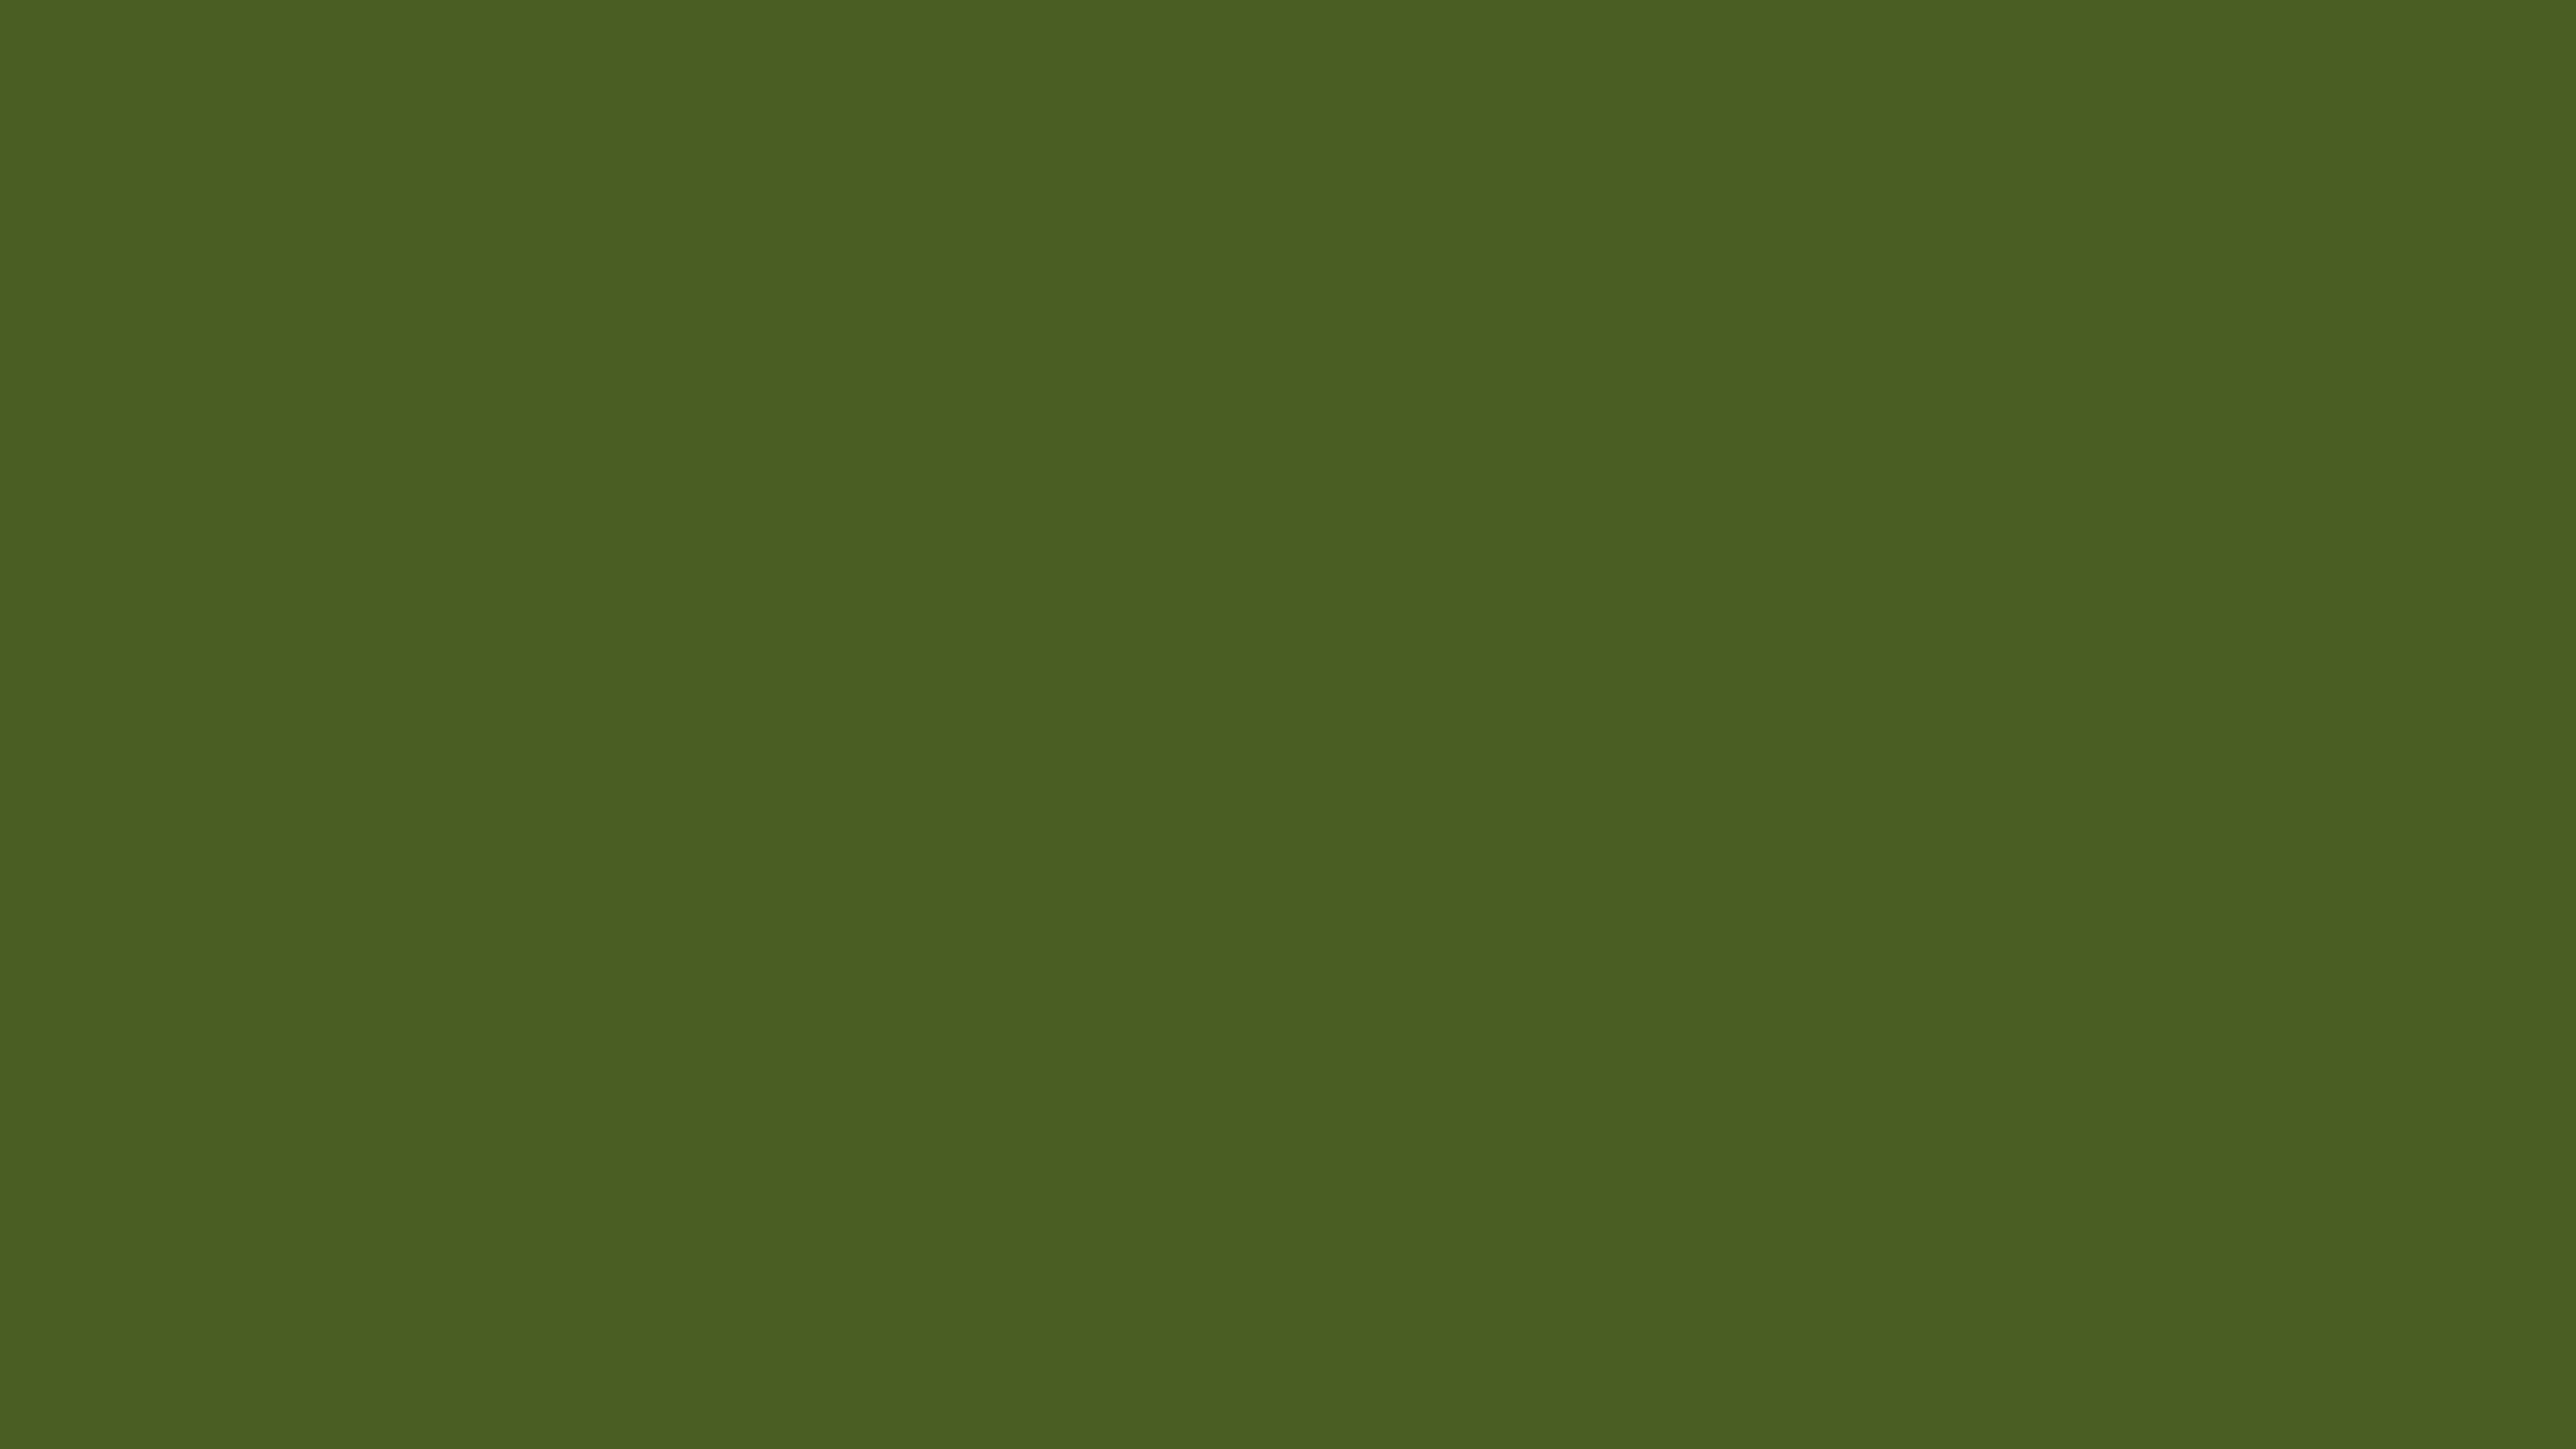 3840x2160 Dark Moss Green Solid Color Background